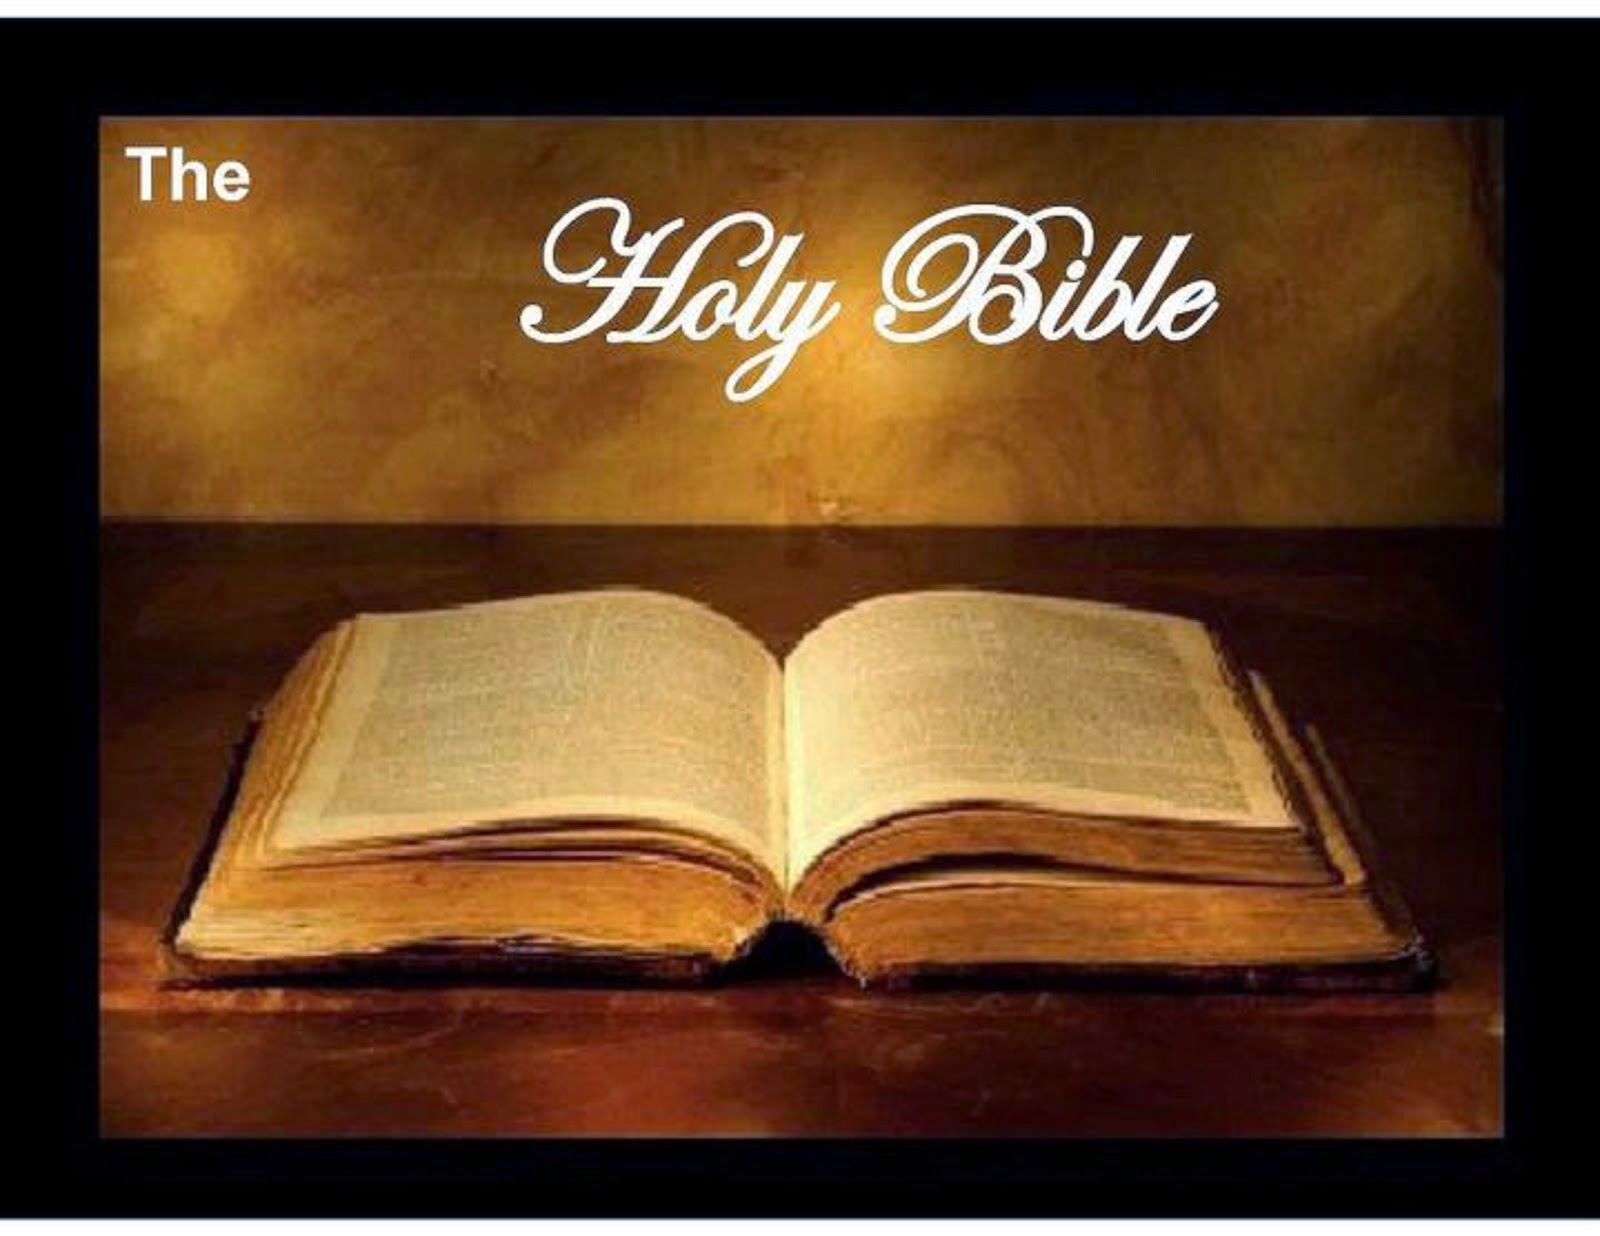 HOLY BIBLE - CONCORDANCE ONLINE STUDY GUIDE